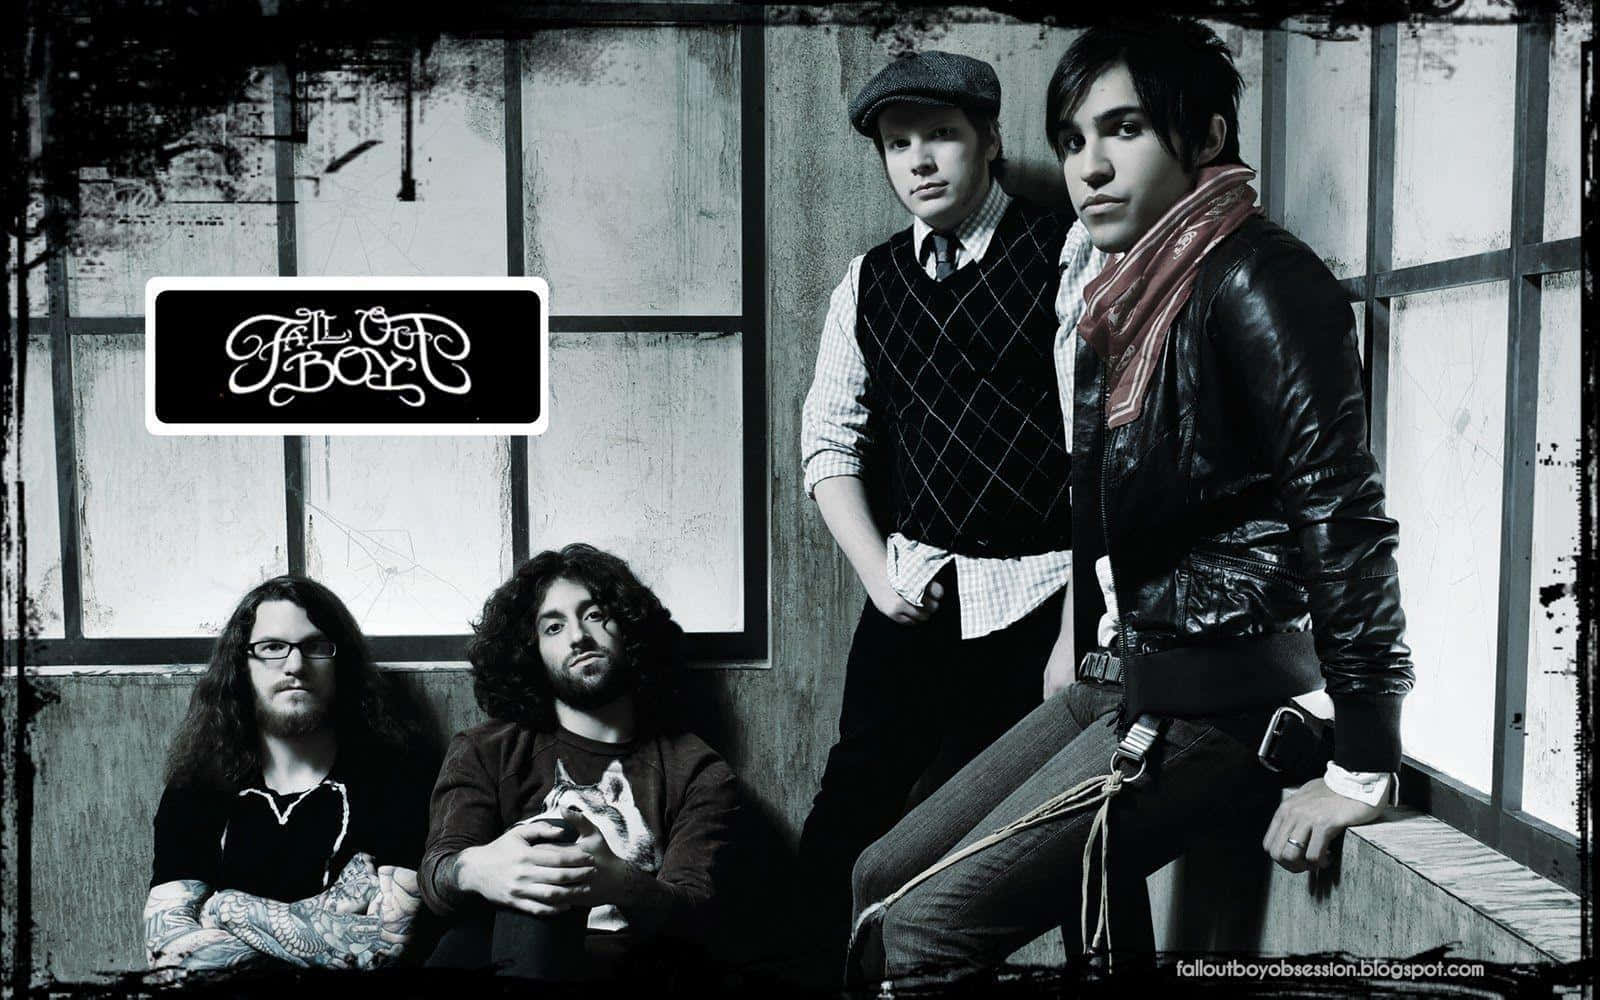 The Band Is Sitting On A Wall With A Sign Wallpaper